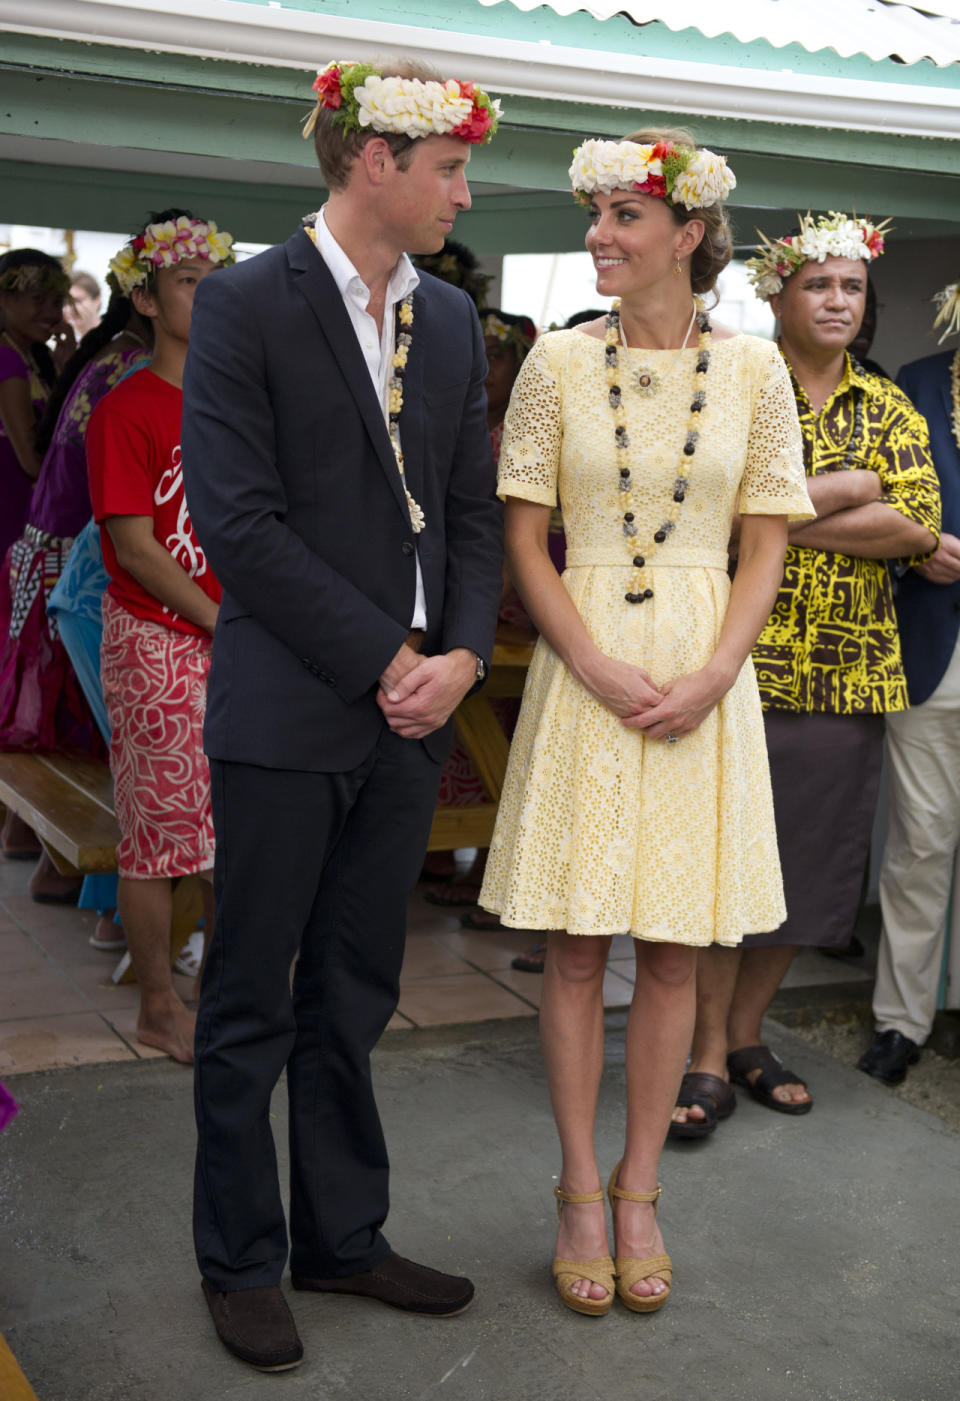 <p>The Duchess spent a day in the Solomon Islands in a primrose yellow dress featuring a broderie anglaise design. She teamed the look with Stuart Weitzman wedges.</p><p><i>[Photo: PA]</i></p>